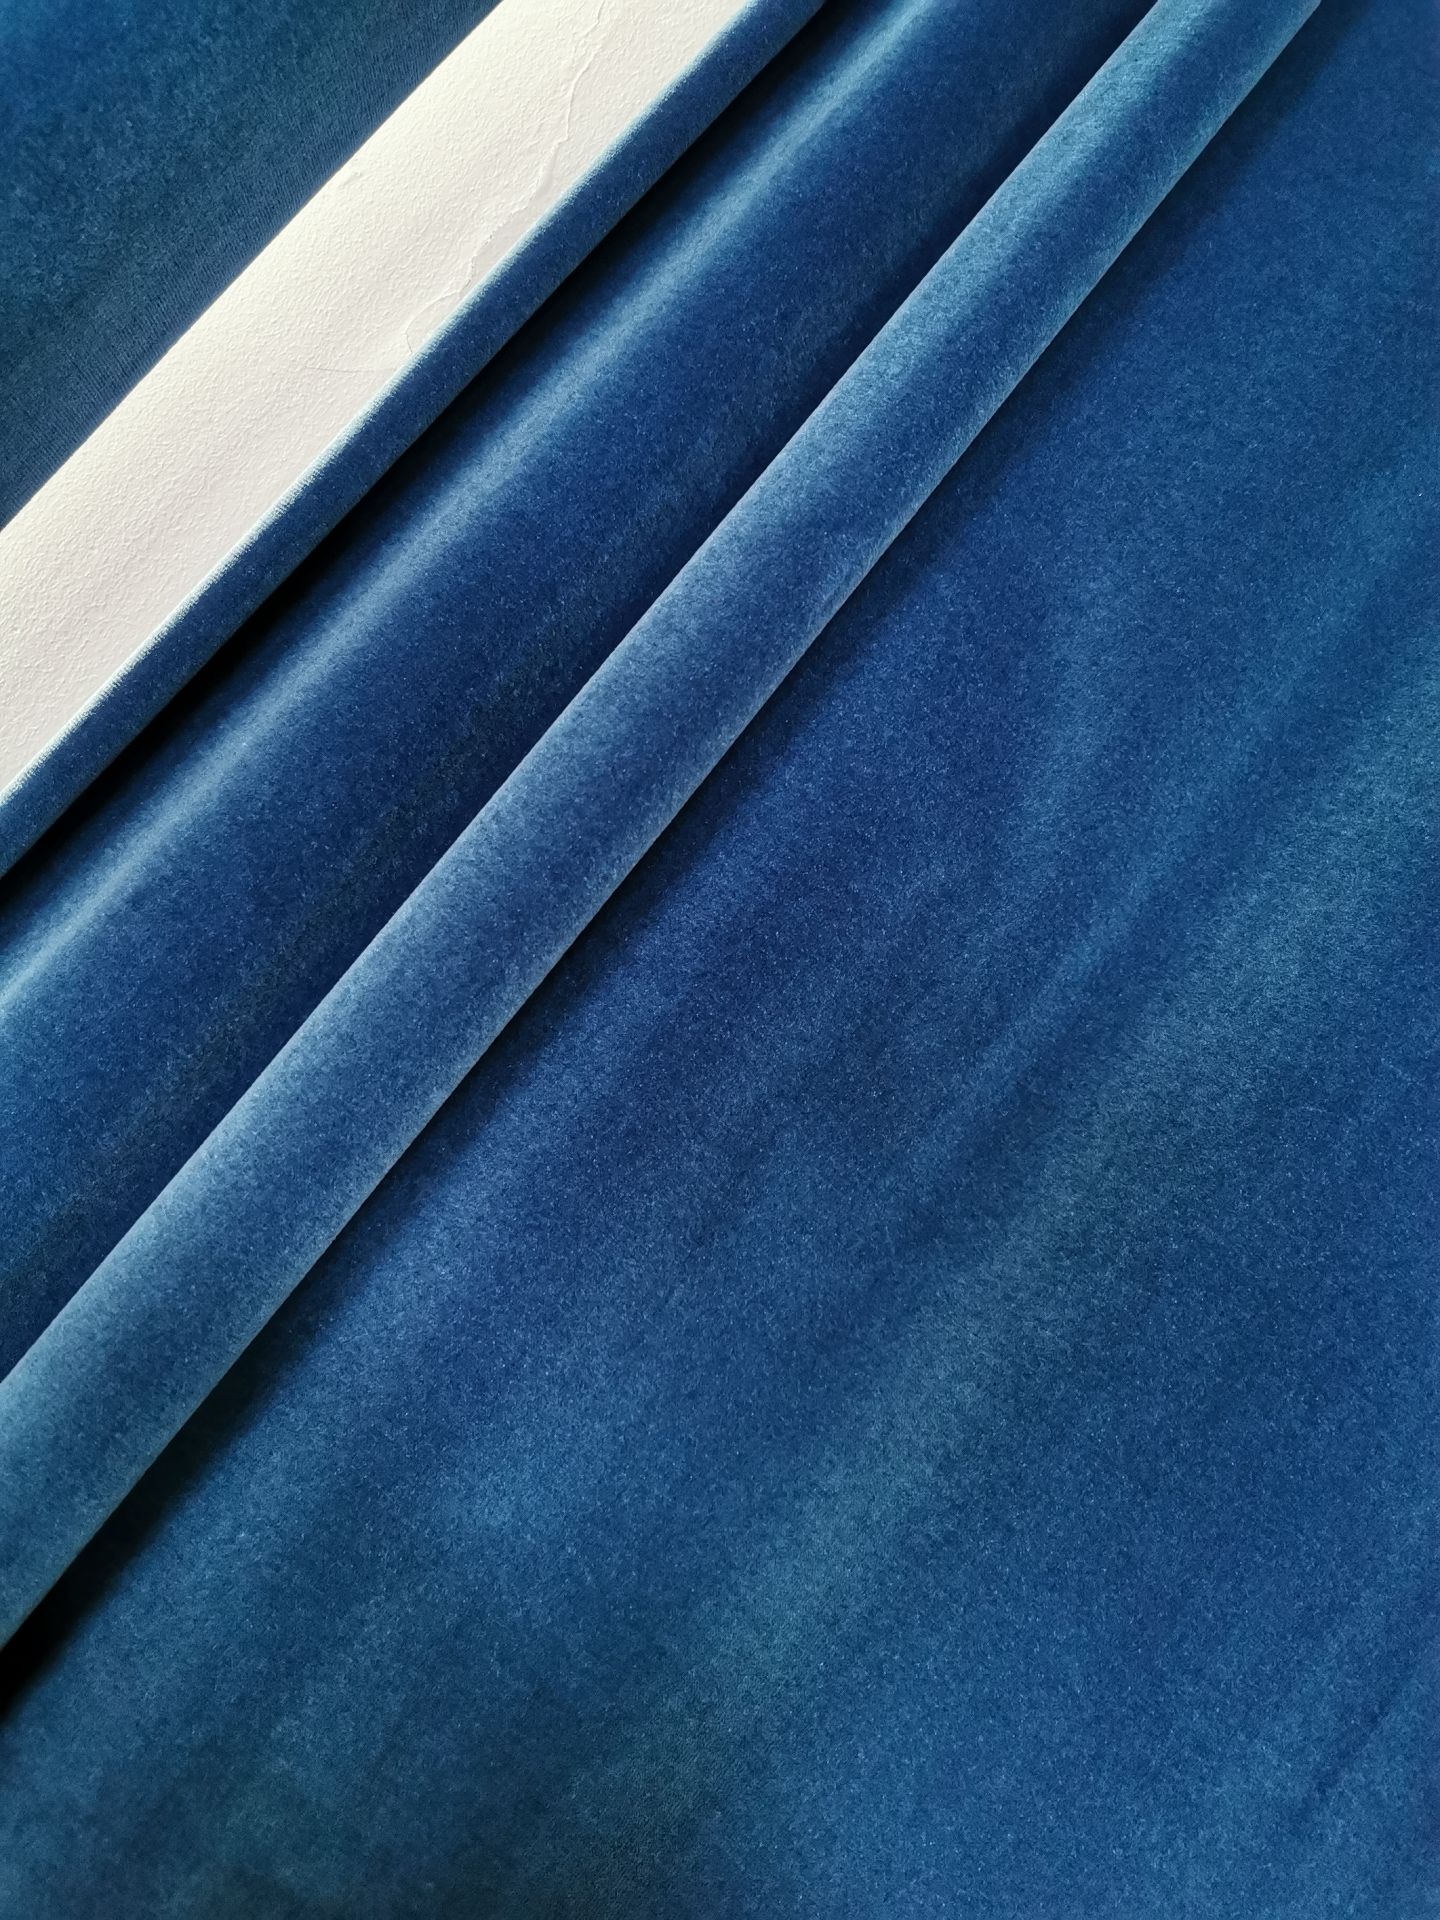 Tall curtains aprox 15ft x 7ft Navy blue - Image 2 of 2